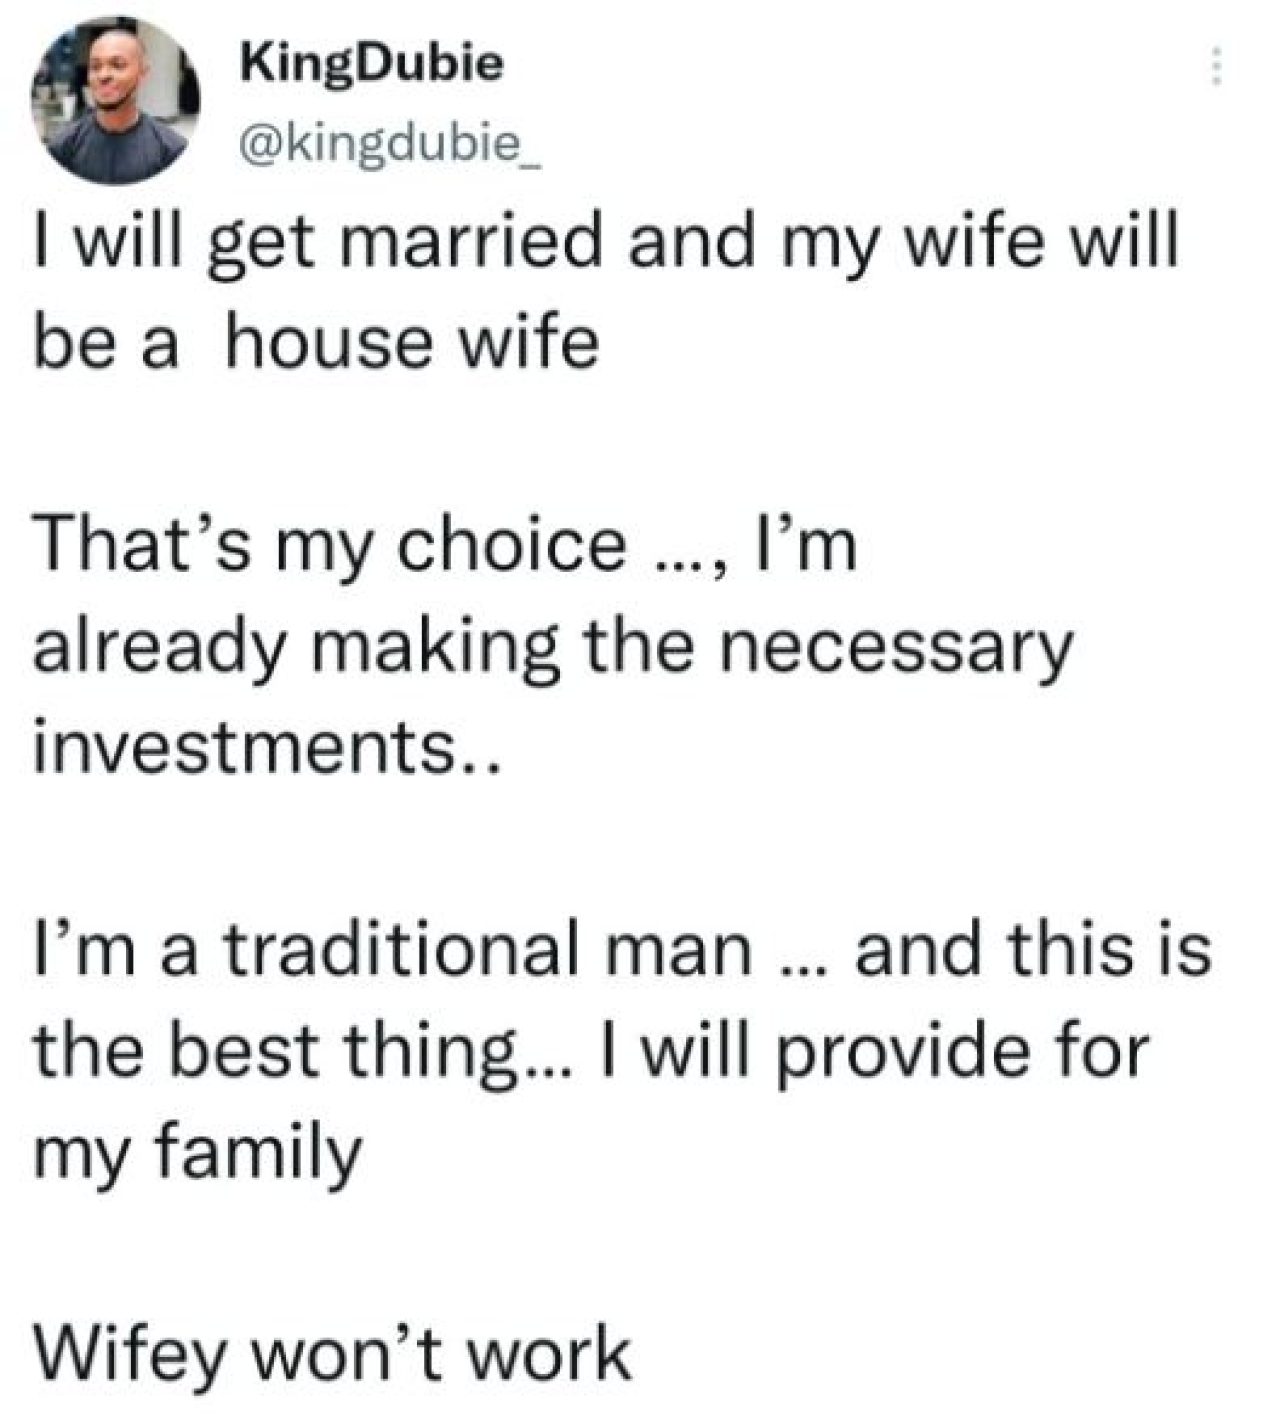 "A happy home with happy children should be the goal of women" Man vows to never permit his wife to work Afro News Wire